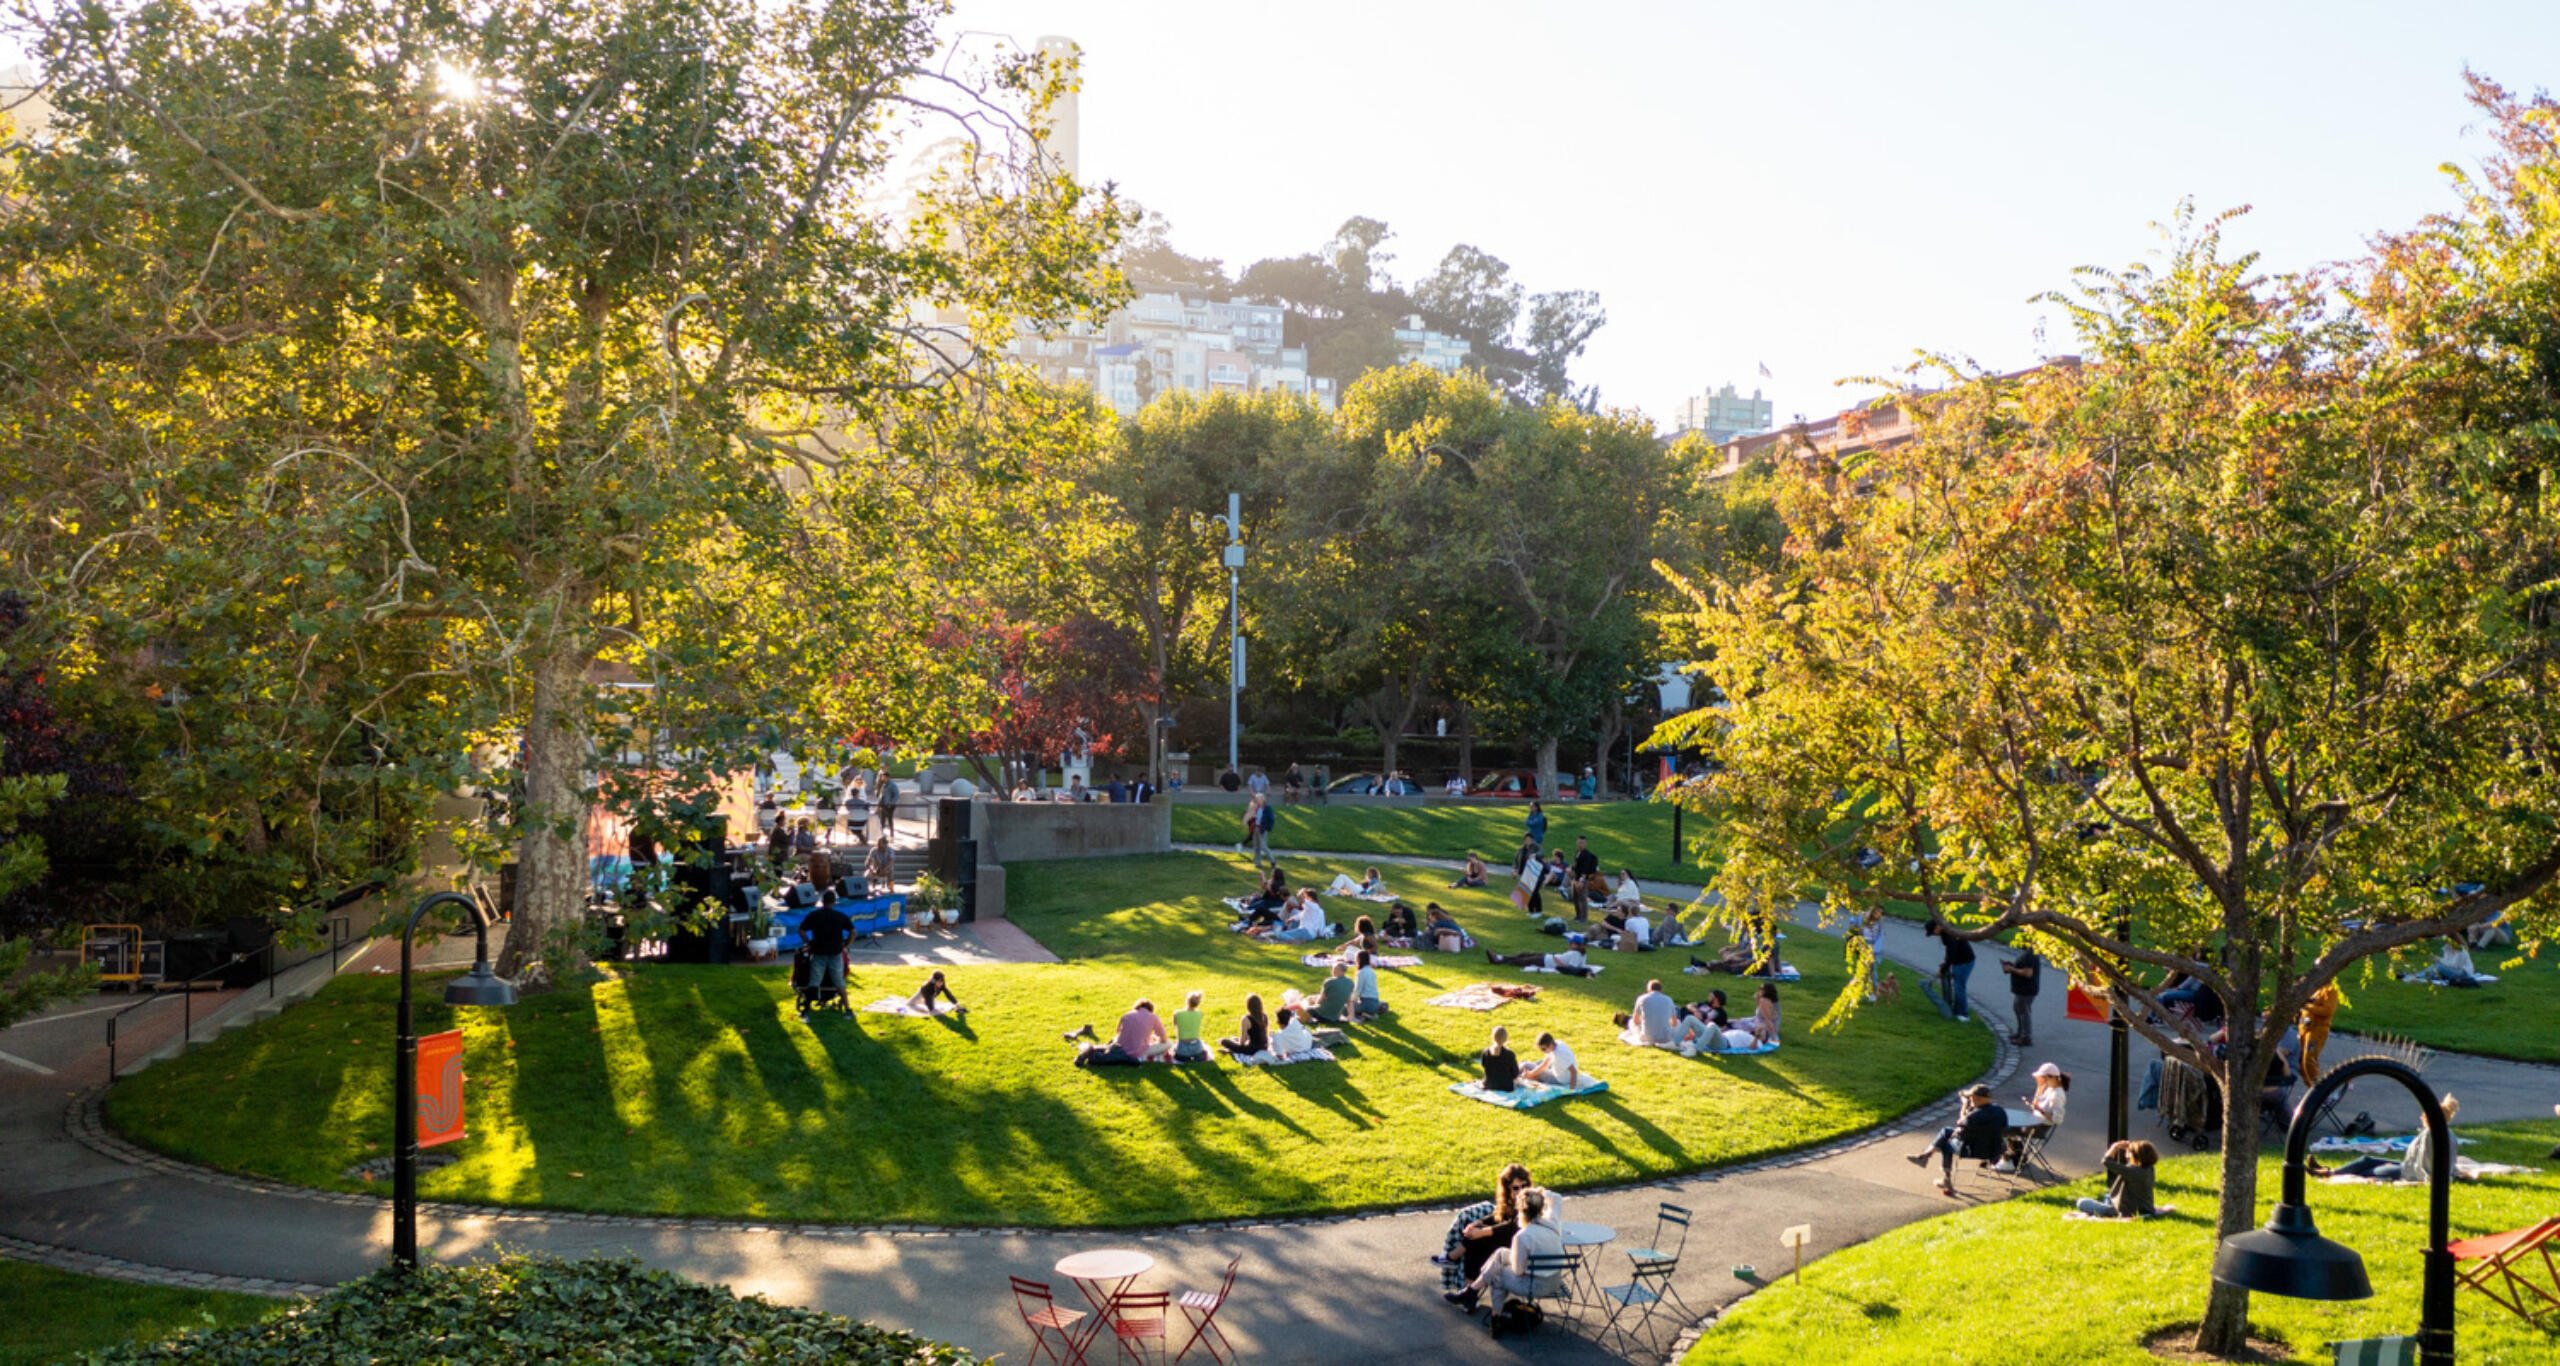 View of greenspace at Levi's Plaza with visitors relaxing on a grassy hill